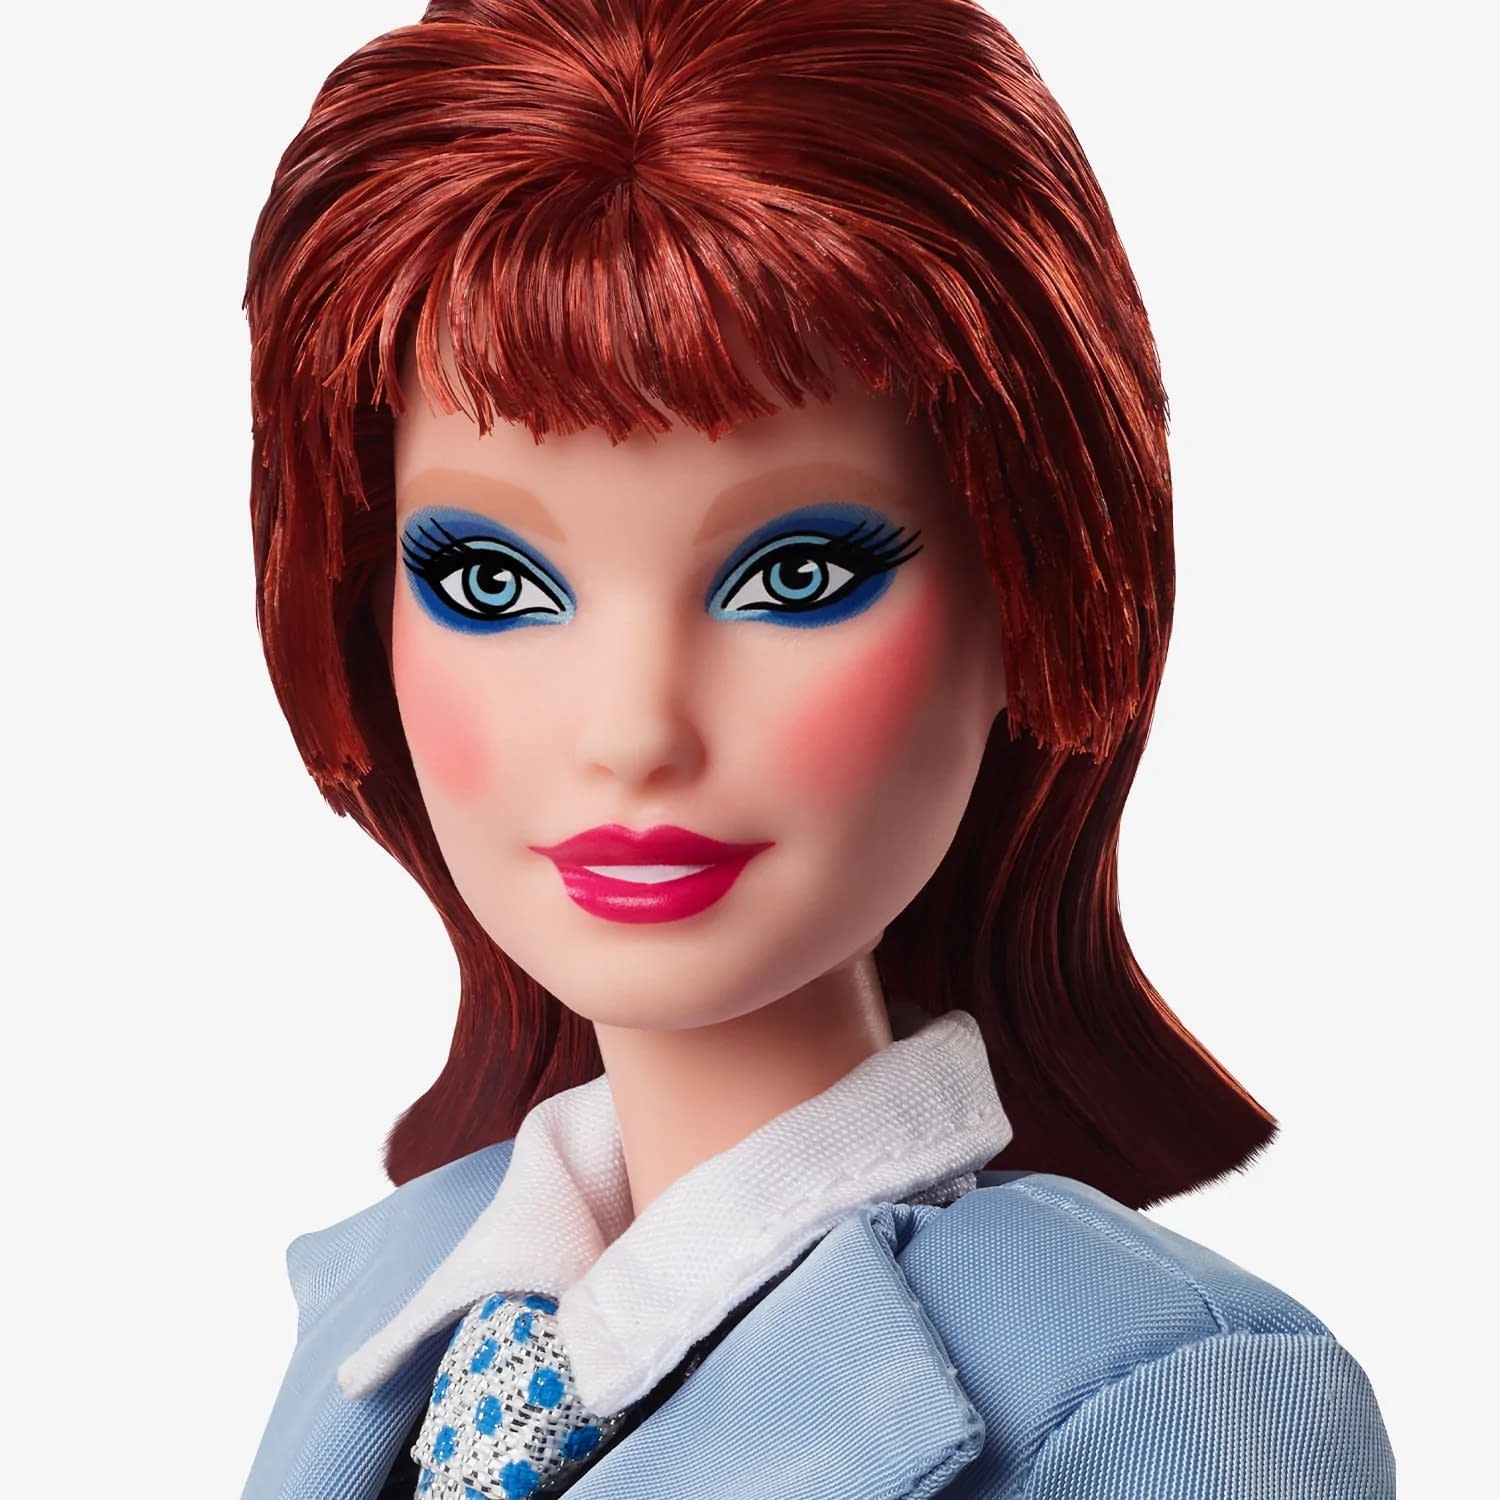 David Bowie's Life on Mars? Receives a New Barbie from Mattel